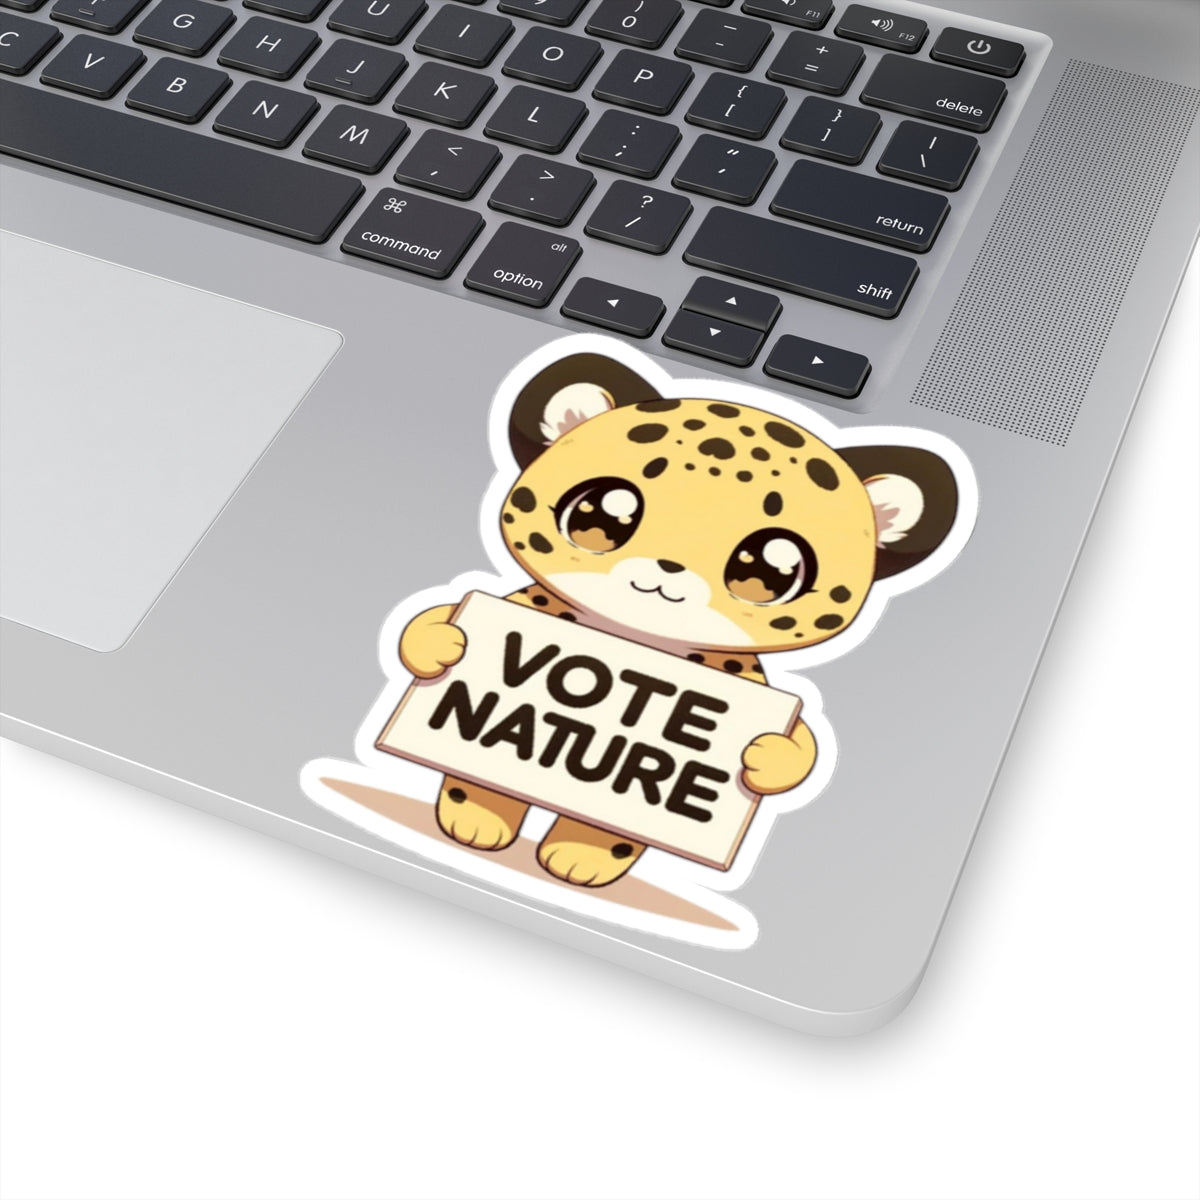 Inspirational Cute Leopard Statement vinyl Sticker: Vote Nature! for laptop, kindle, phone, ipad, instrument case, notebook, mood board